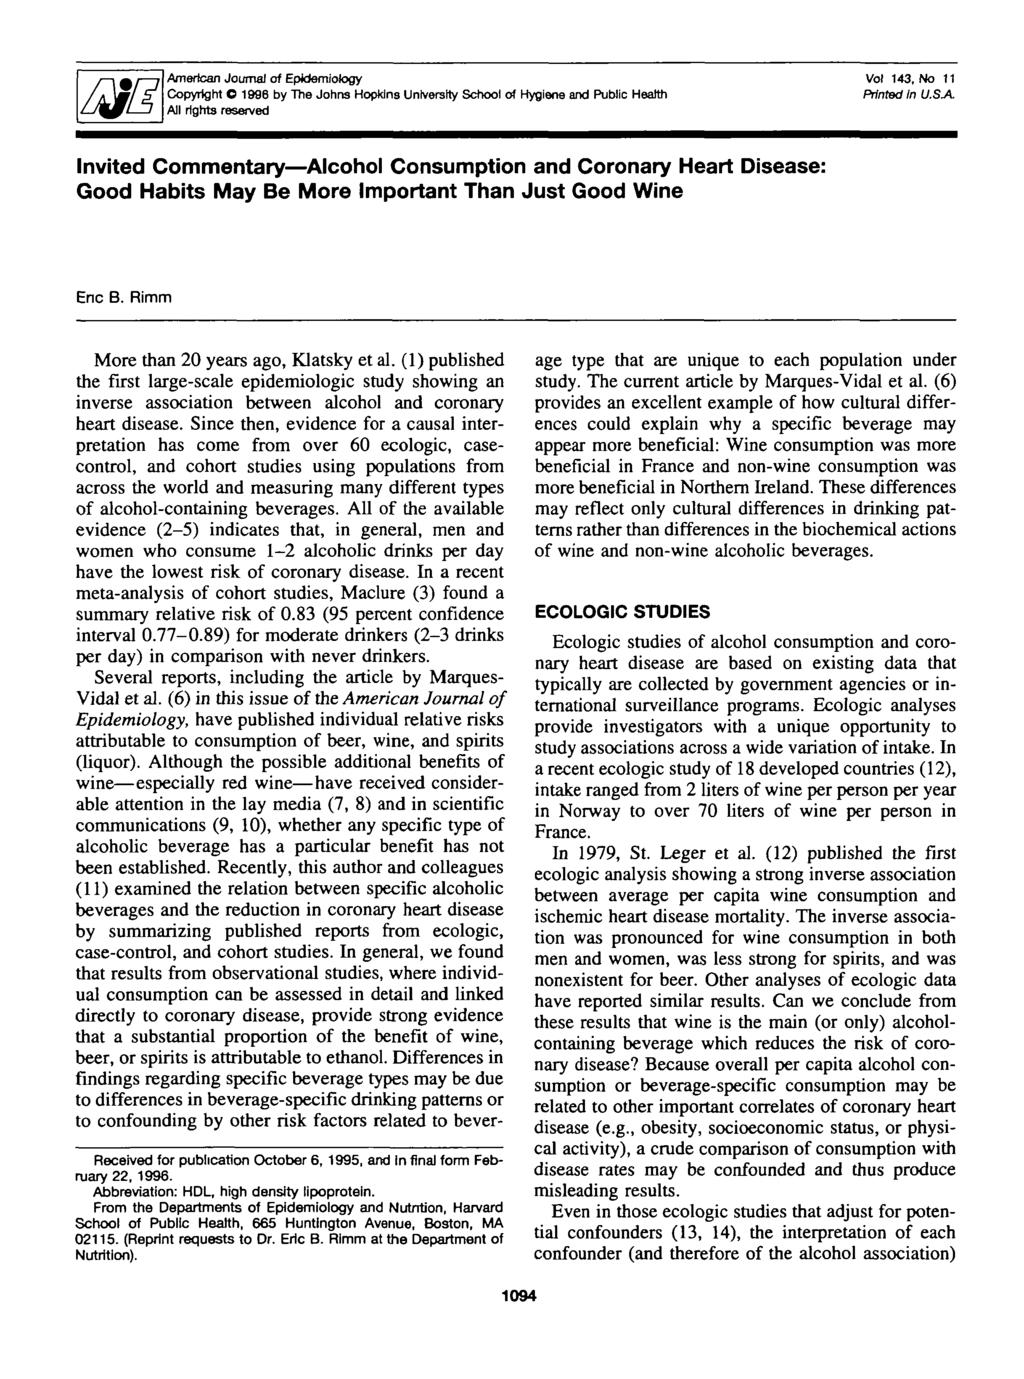 American Journal of Epidemiology Copyright O 1996 by The Johns Hopkins University School of Hygiene and Public Health All rights reserved Vol 143, No 11 Printed in U.SA.